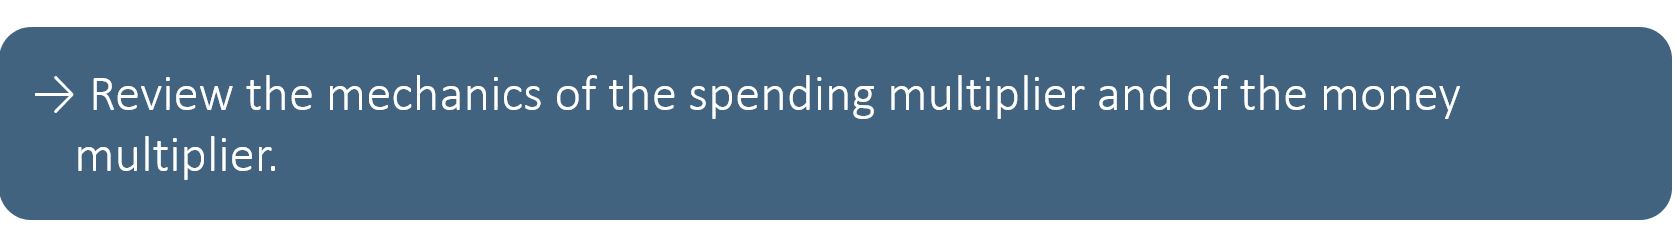  Review the mechanics of the spending multiplier and of the money multiplier.